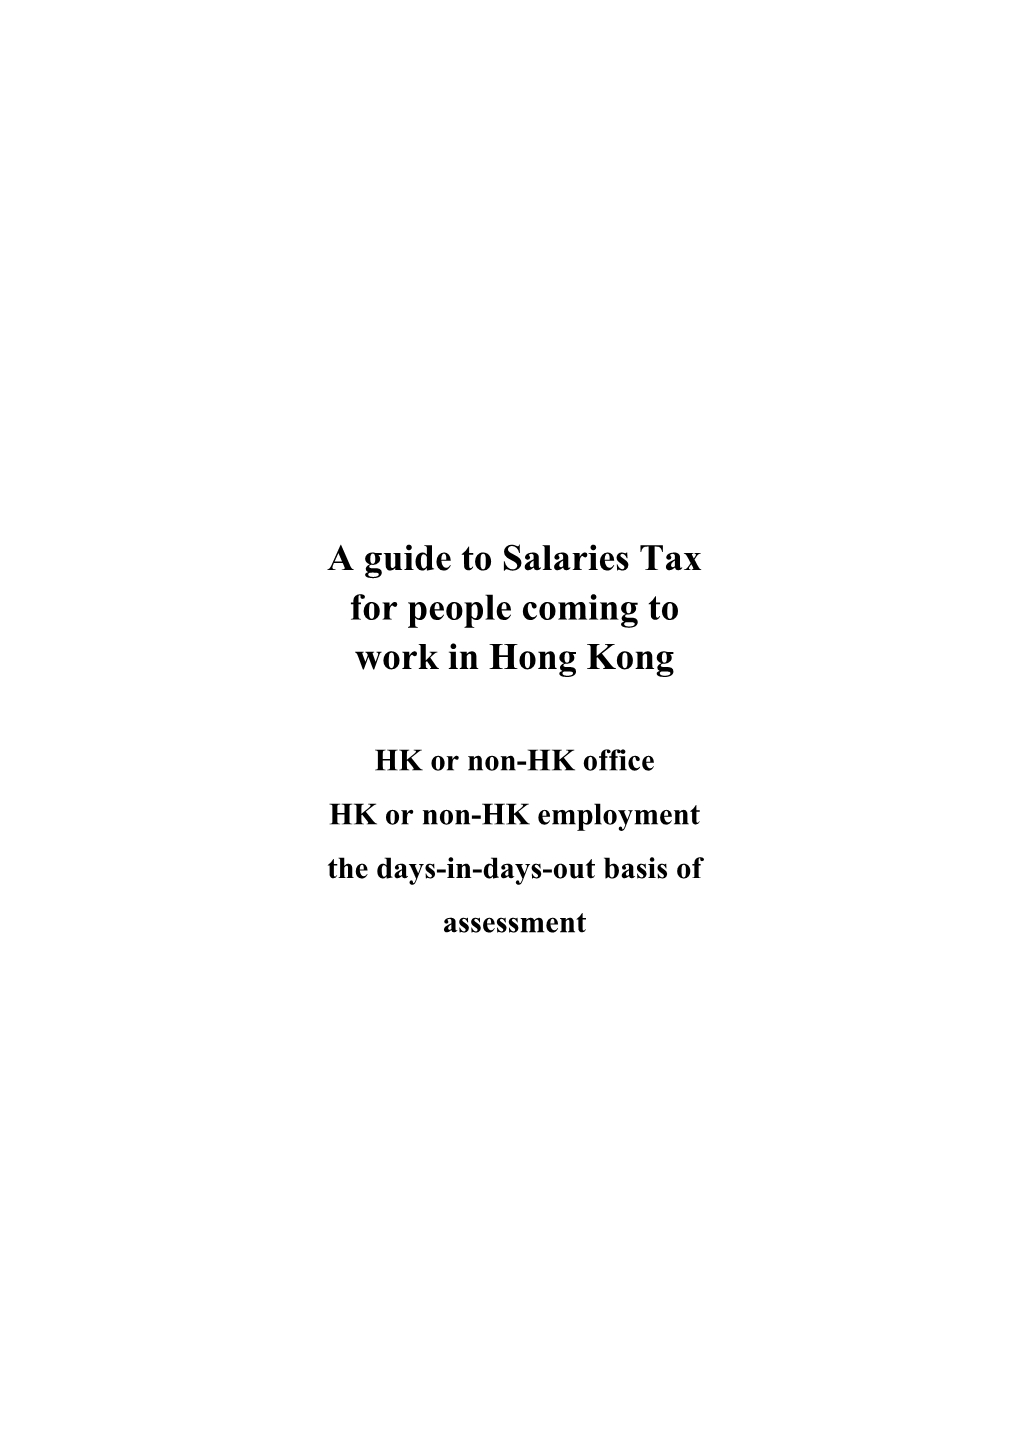 A Guide to Salaries Tax for People Coming to Work in Hong Kong